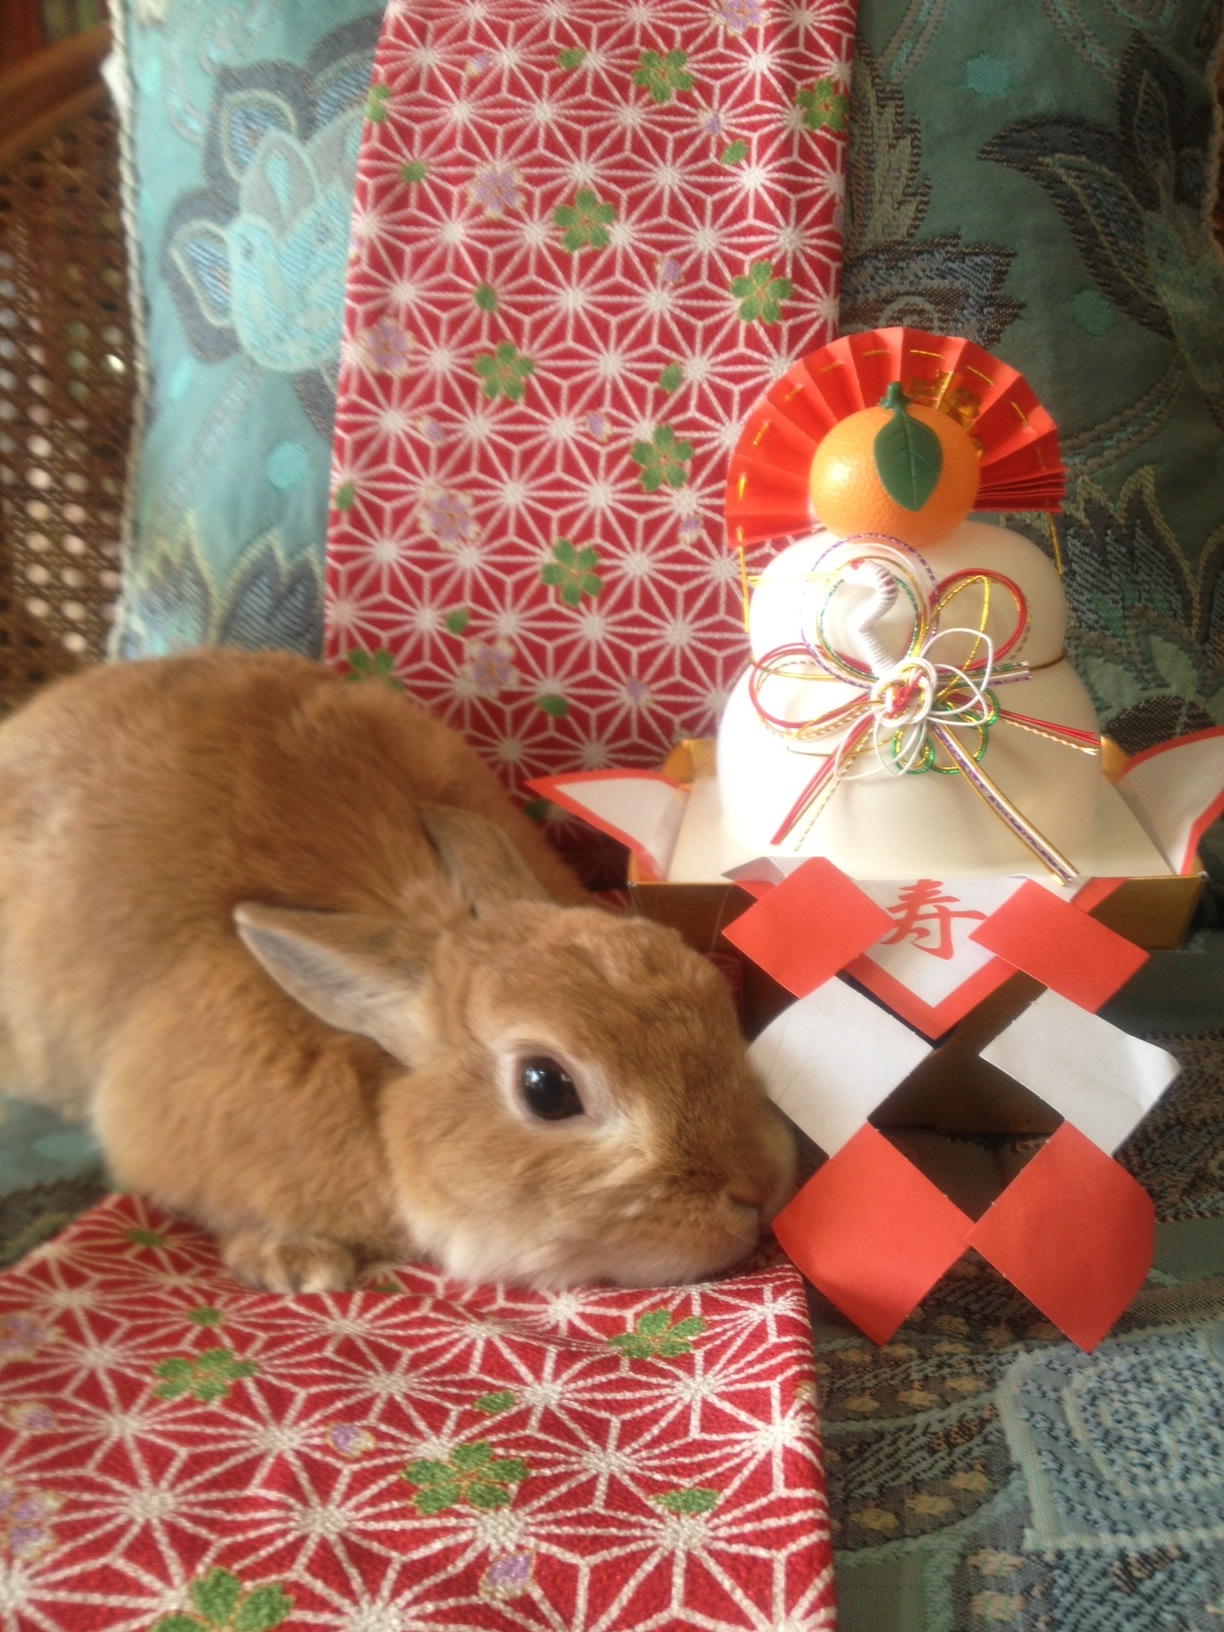 Bunny Celebrates the New Year in Japan with Kagami Mochi